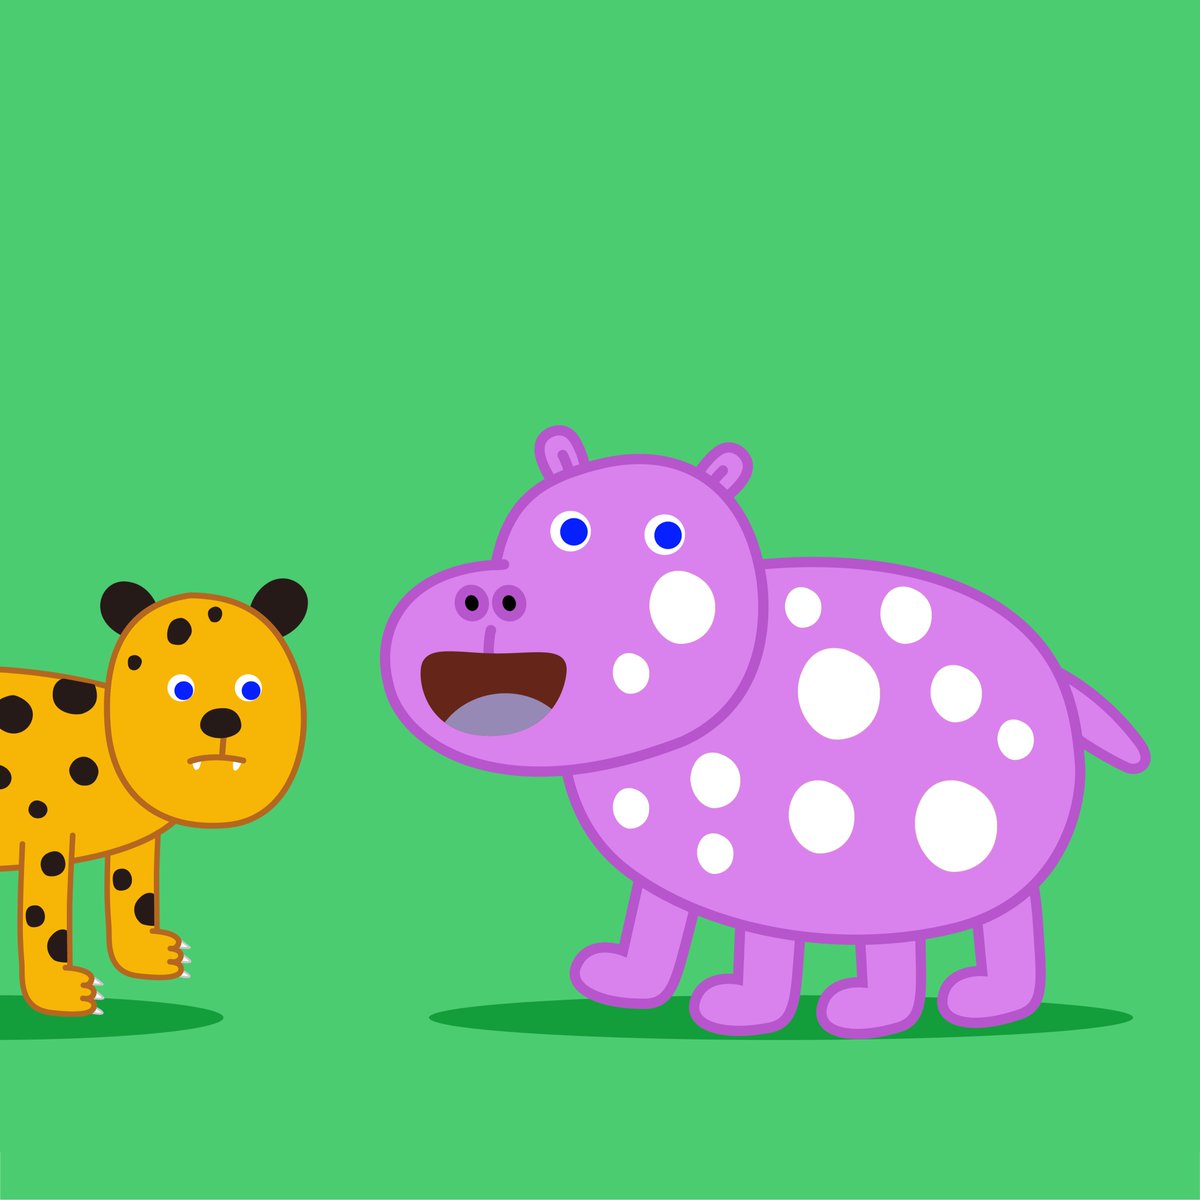 Let's kick off a week celebrating the beauty of diversity with our spotty animal friends. Life's more fun in color! 🦛🌈 

#DiversityWeek #SpotsOfJoy #CelebrateDifferences #cabbageandtyler #kidstories #kidsongs